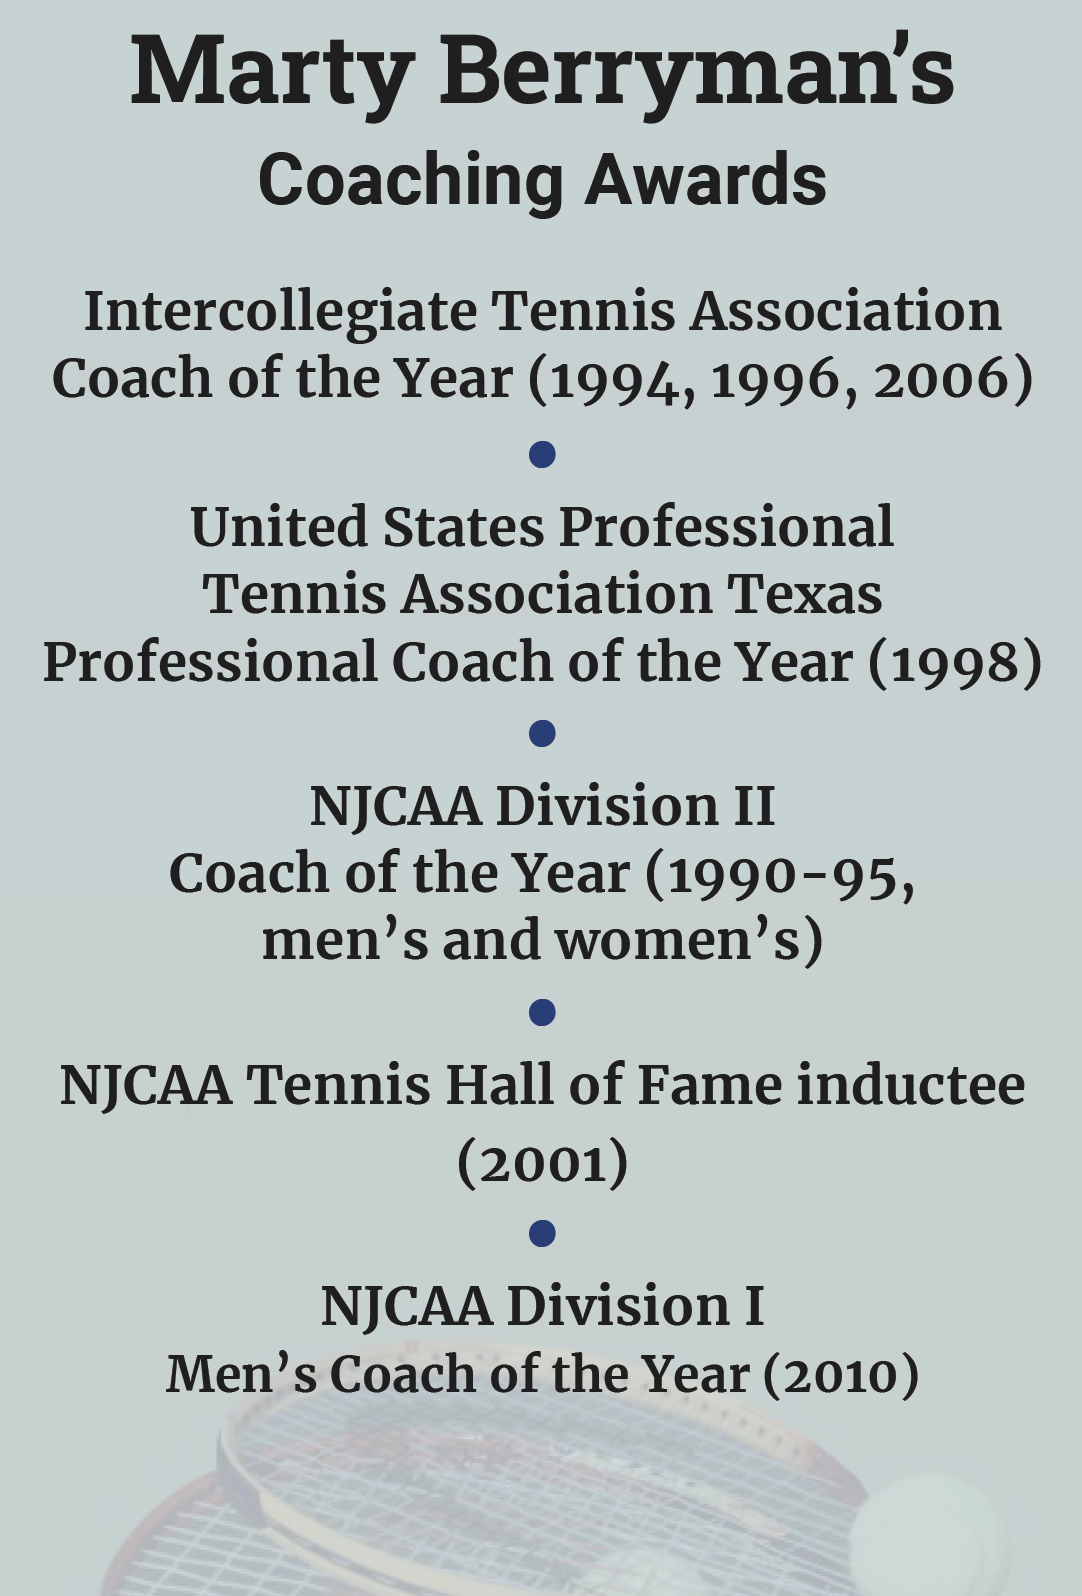 Marty Berryman’s  Coaching Awards Intercollegiate Tennis Association Coach of the Year (1994, 1996, 2006) • United States Professional Tennis Association Texas Professional Coach of the Year (1998) • NJCAA Division II  Coach of the Year (1990-95,  men’s and women’s) • NJCAA Tennis Hall of Fame inductee  (2001) • NJCAA Division I  Men’s Coach of the Year (2010)